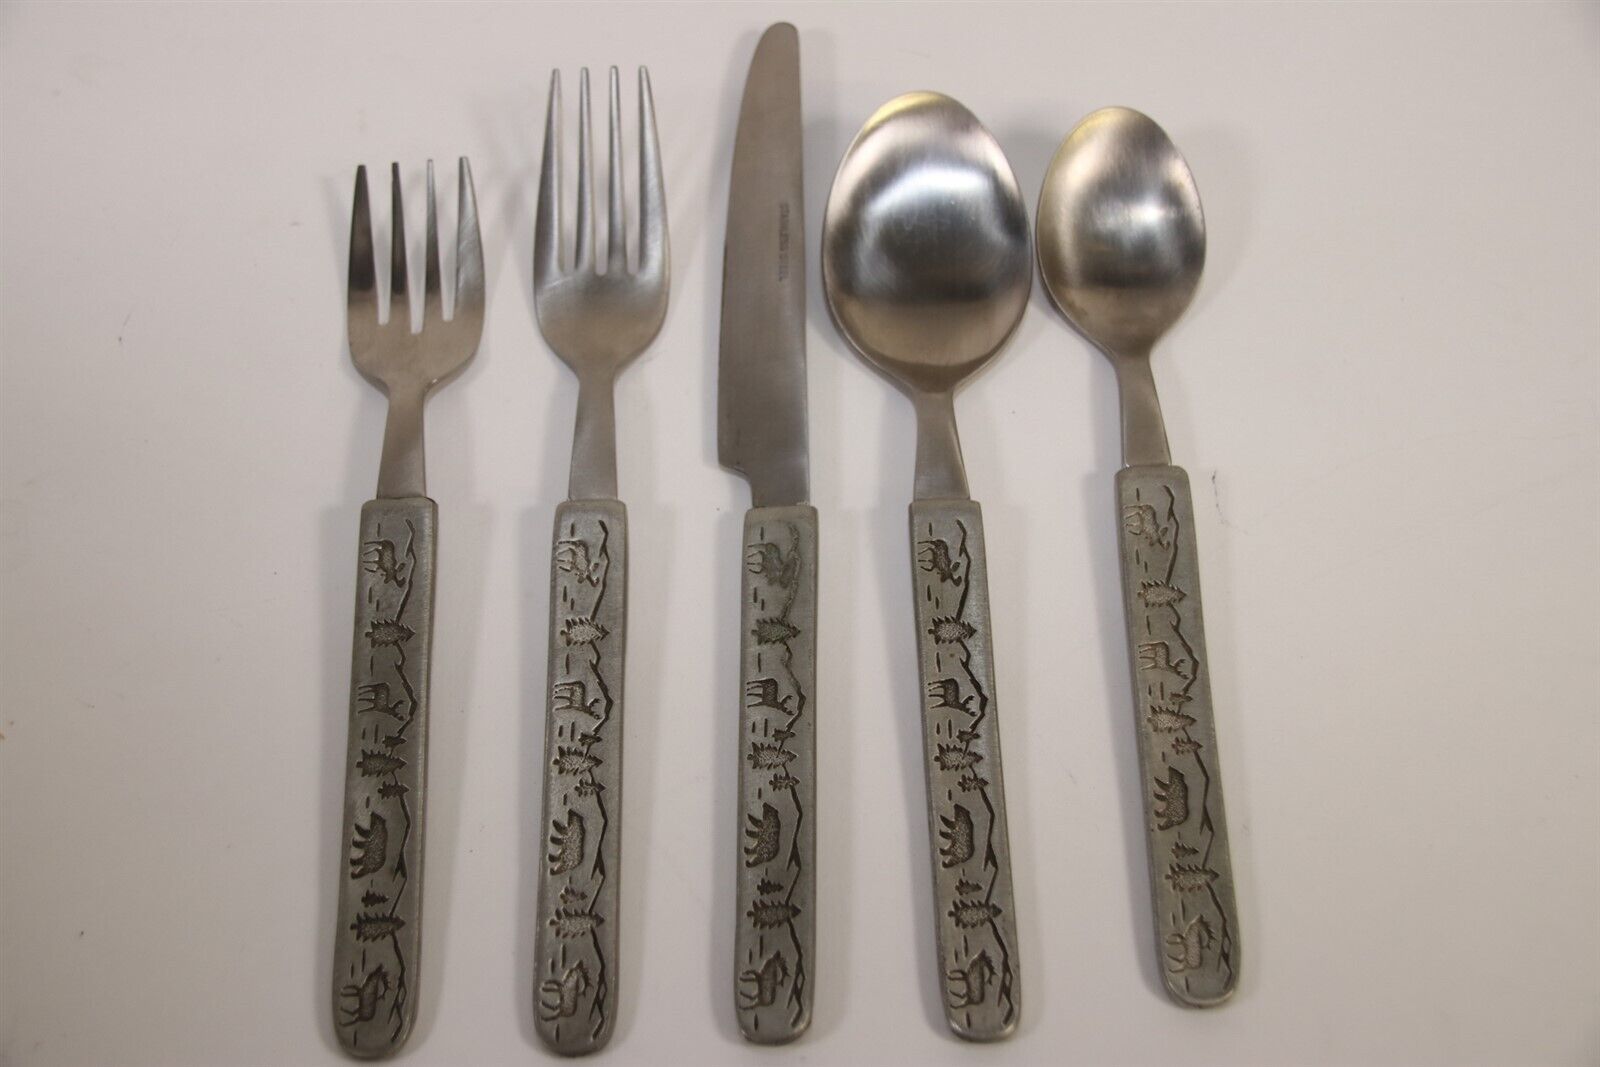 Angler's Expressions Wildlife Flatware 5-Piece Place Setting 18/8 Stainless